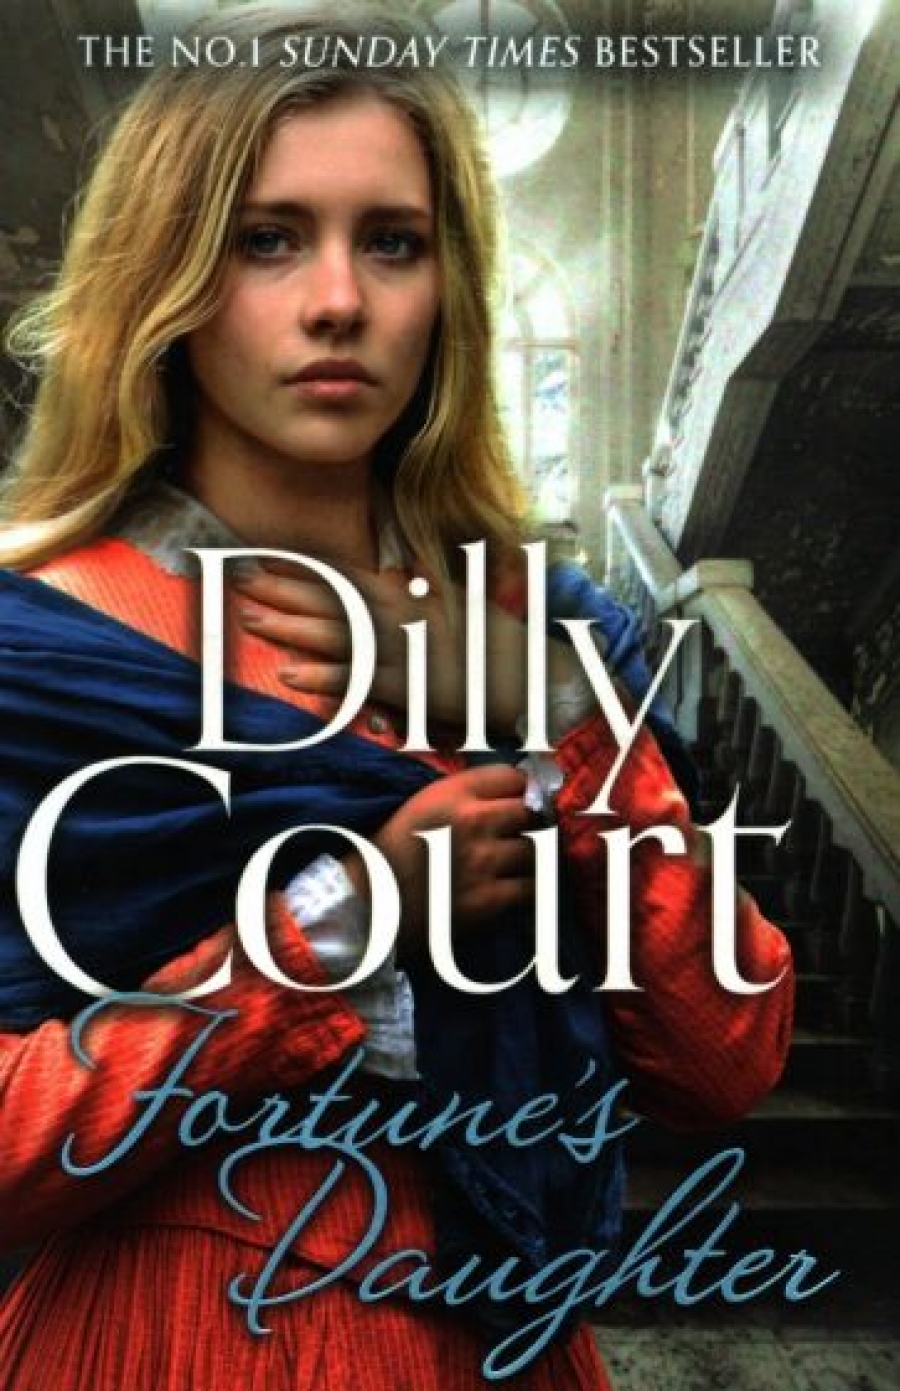 Court Dilly Fortune's Daughter 